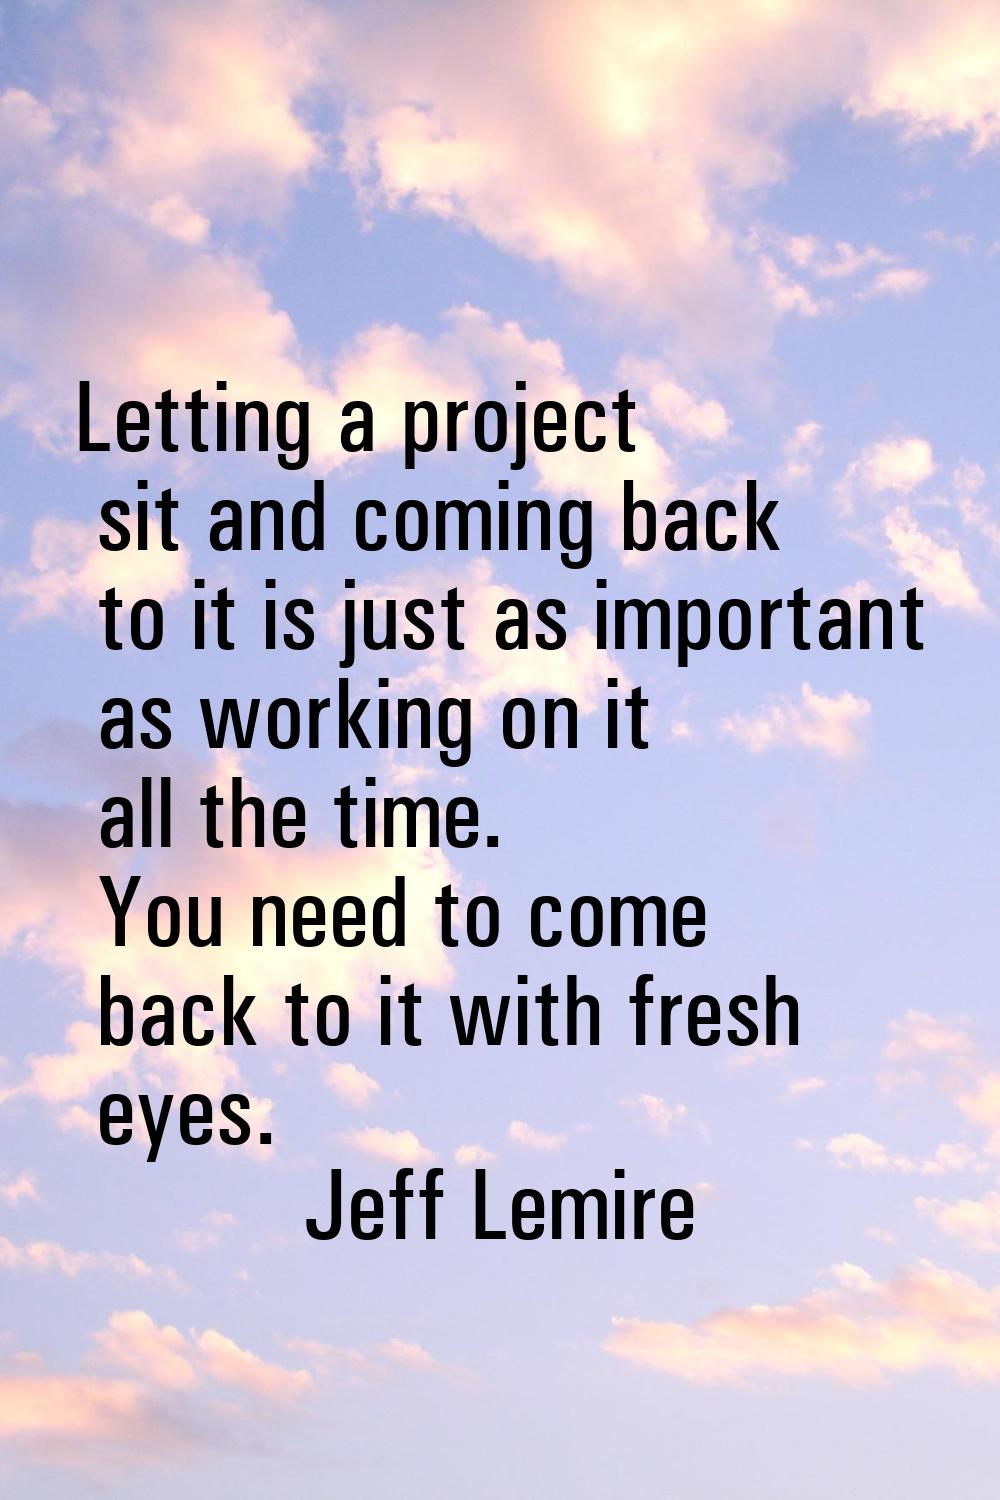 Letting a project sit and coming back to it is just as important as working on it all the time. You